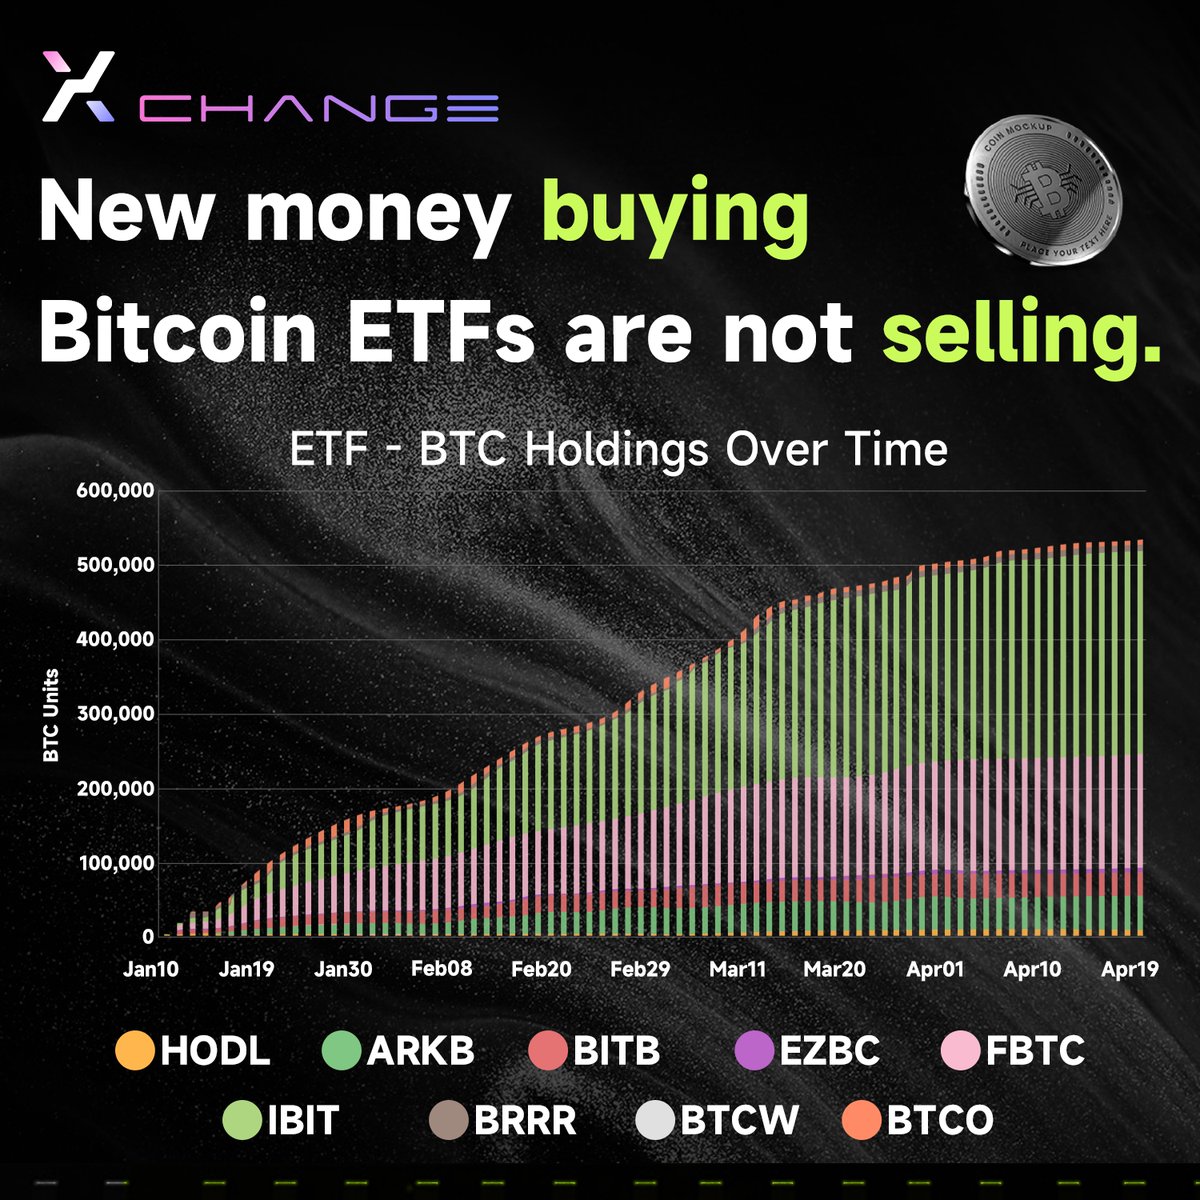 New money buying #Bitcoin ETFs are not selling. This is long-term capital allocation. #BitcoinETF